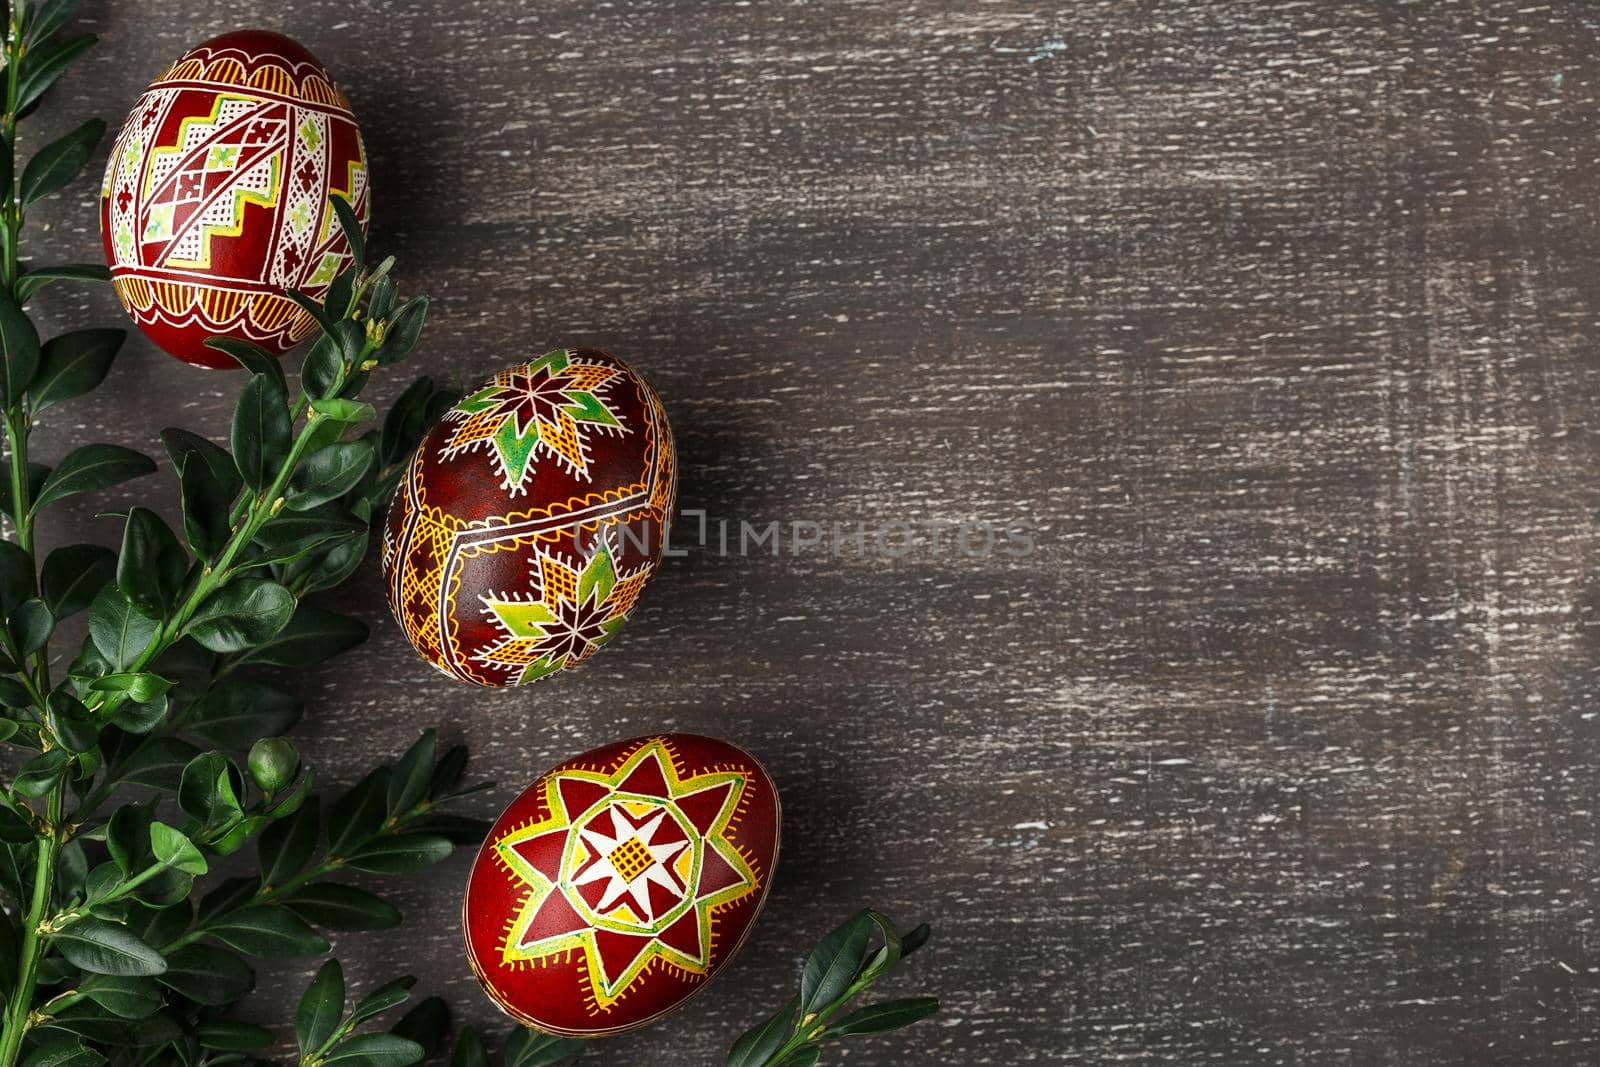 Handmade Easter eggs. Ukrainian pysanka decorated with wax-resist dyeing technique. Grey shabby background with copy empty space for text